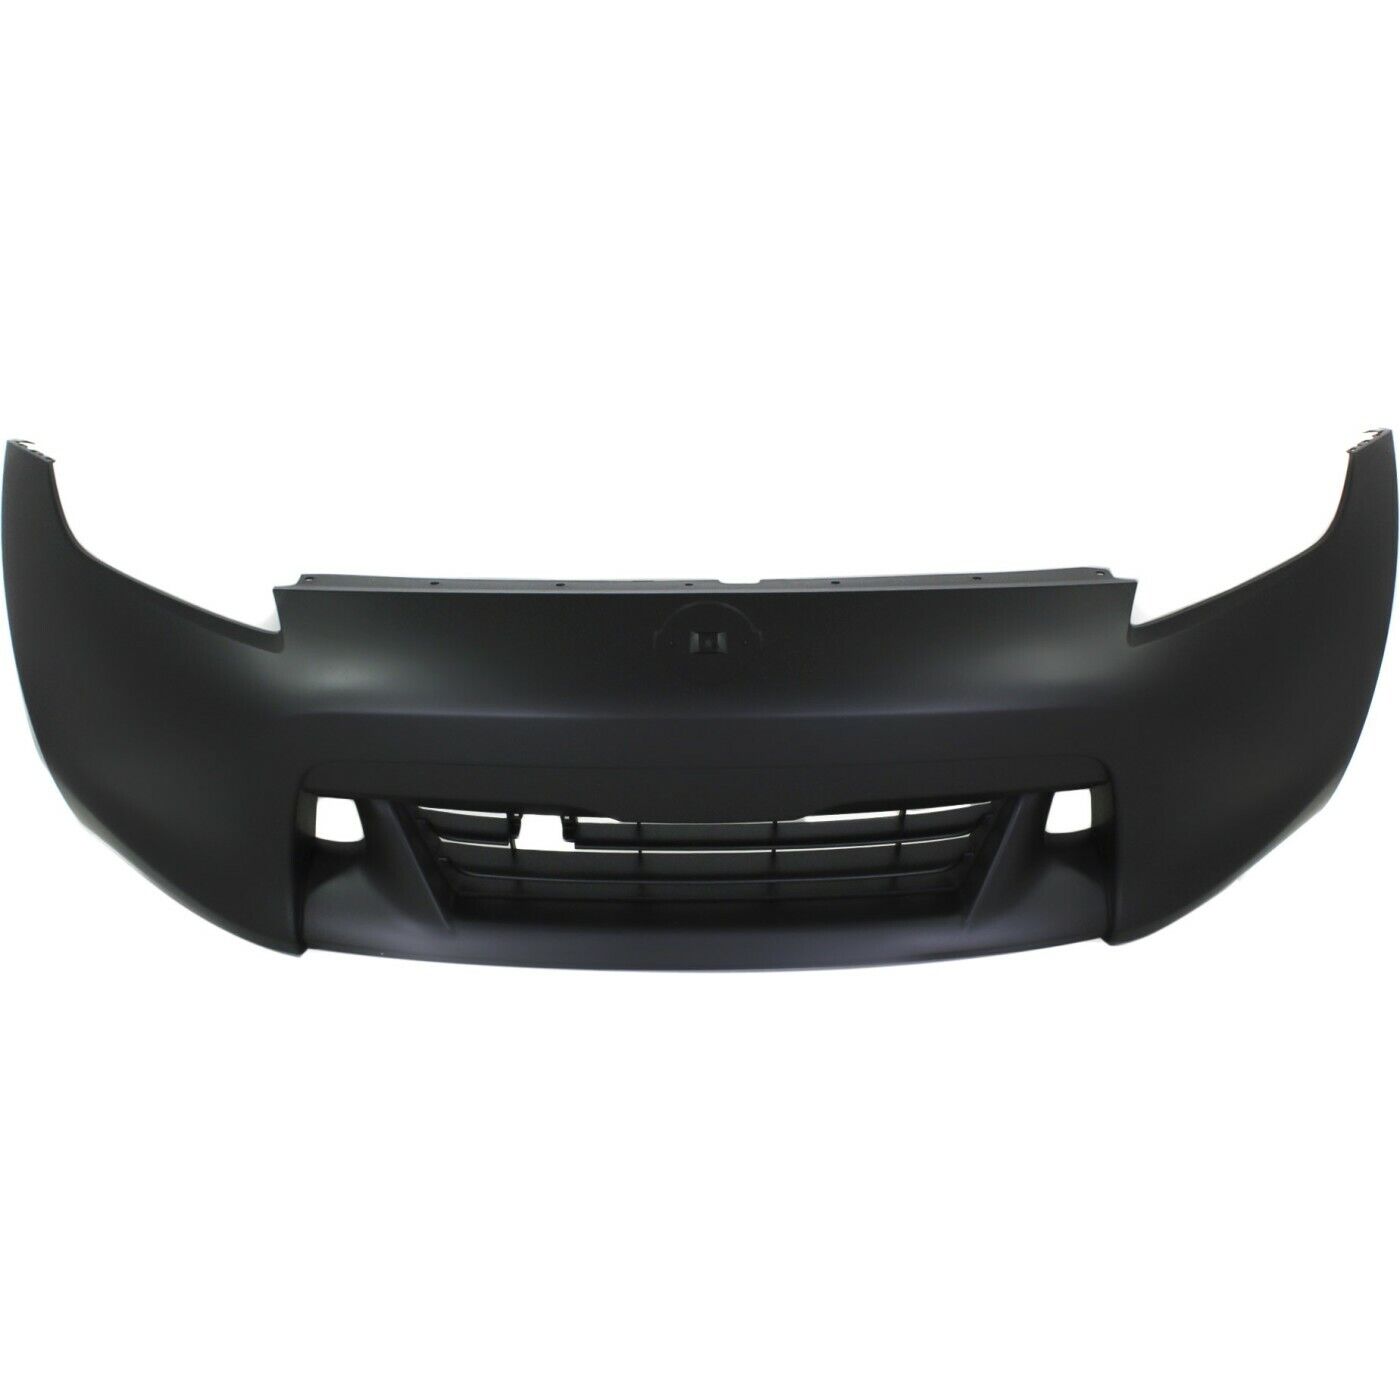 Front Bumper Cover For 2009-2012 Nissan 370Z Coupe Primed